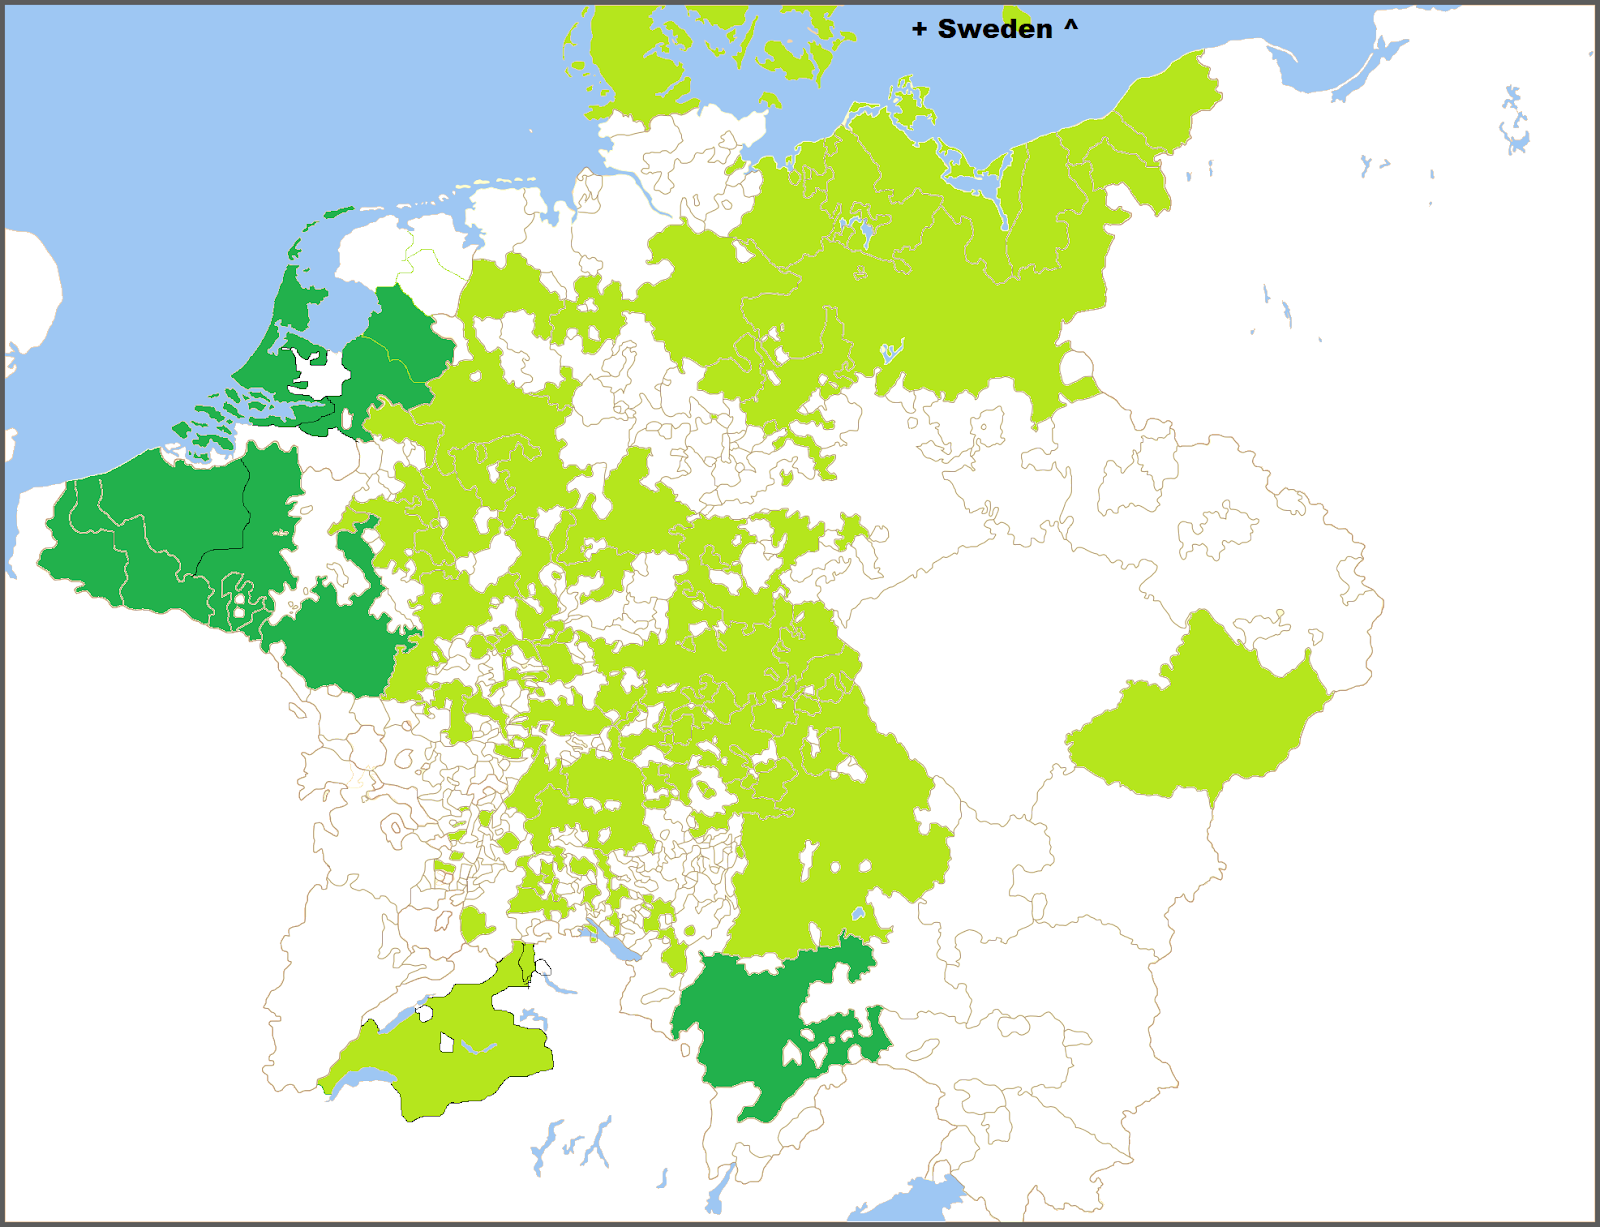 MPIeR Repertorium and other initiatives (dark green), period 1500-1800. Map: Blank map of the Holy Roman Empire in 1648, https://commons.wikimedia.org/wiki/File:Holy_Roman_Empire_1648_blank.png